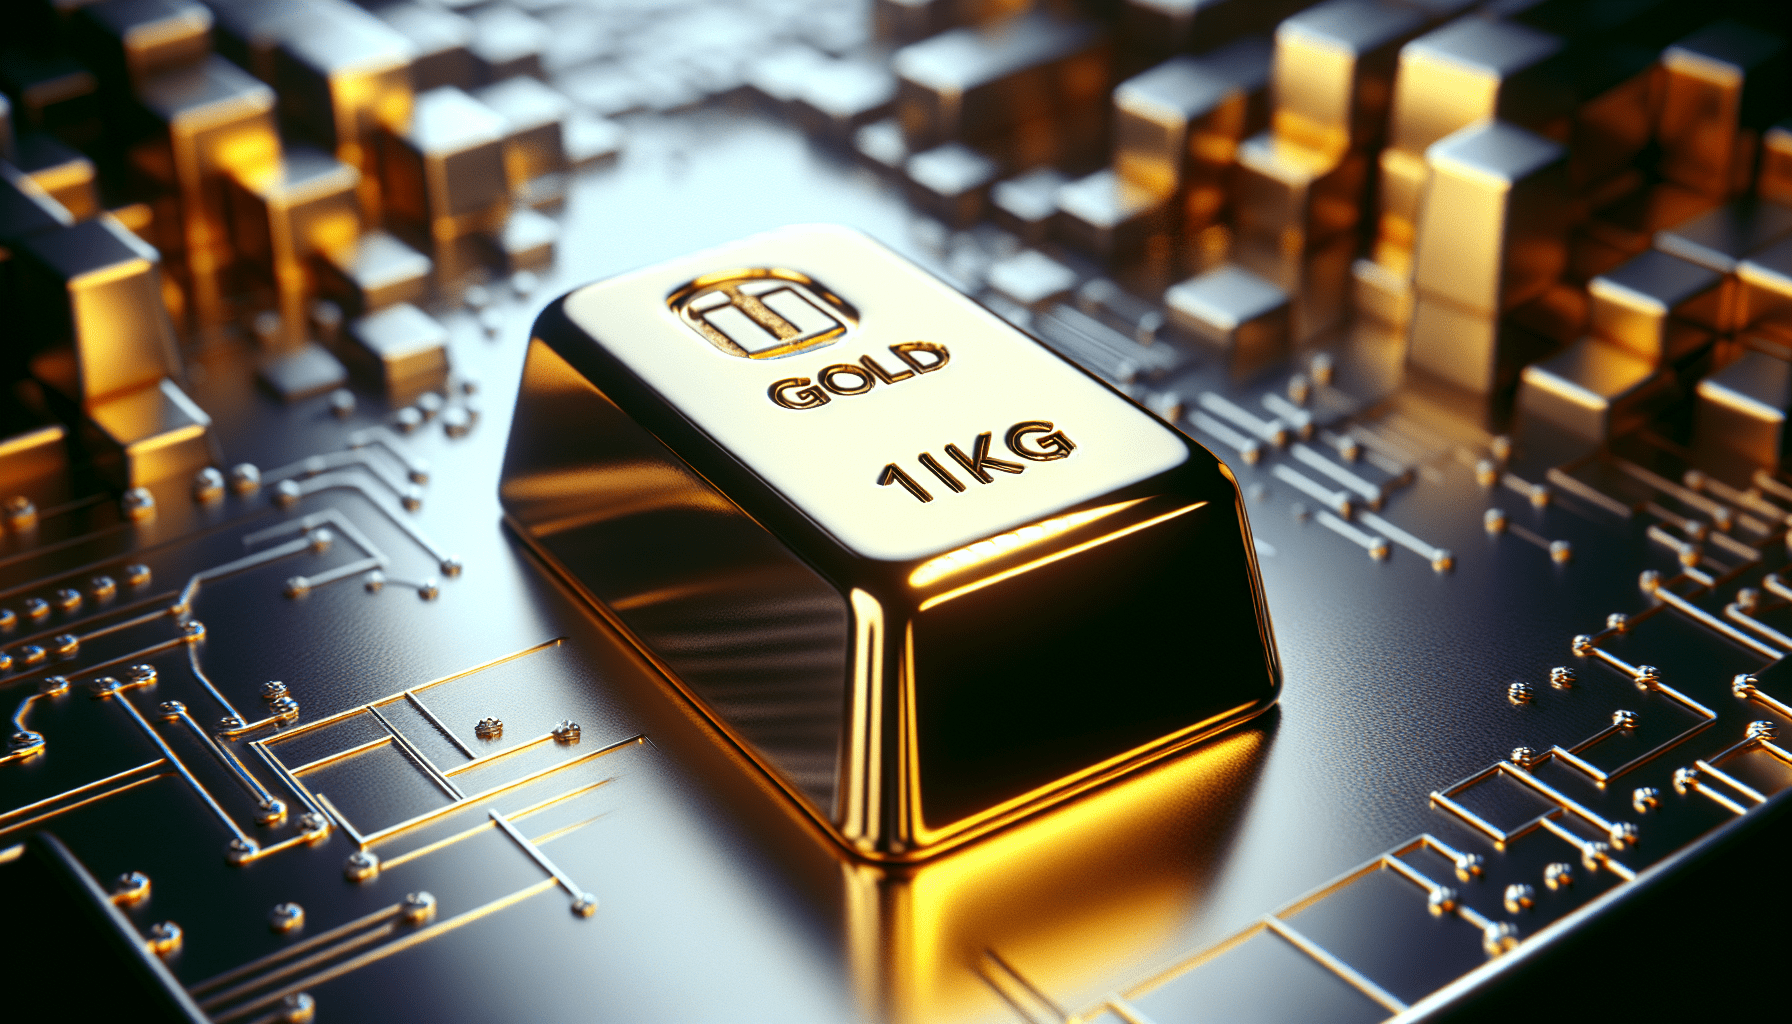 What Is The Price Of A 1kg Gold Bar In Malaysia?